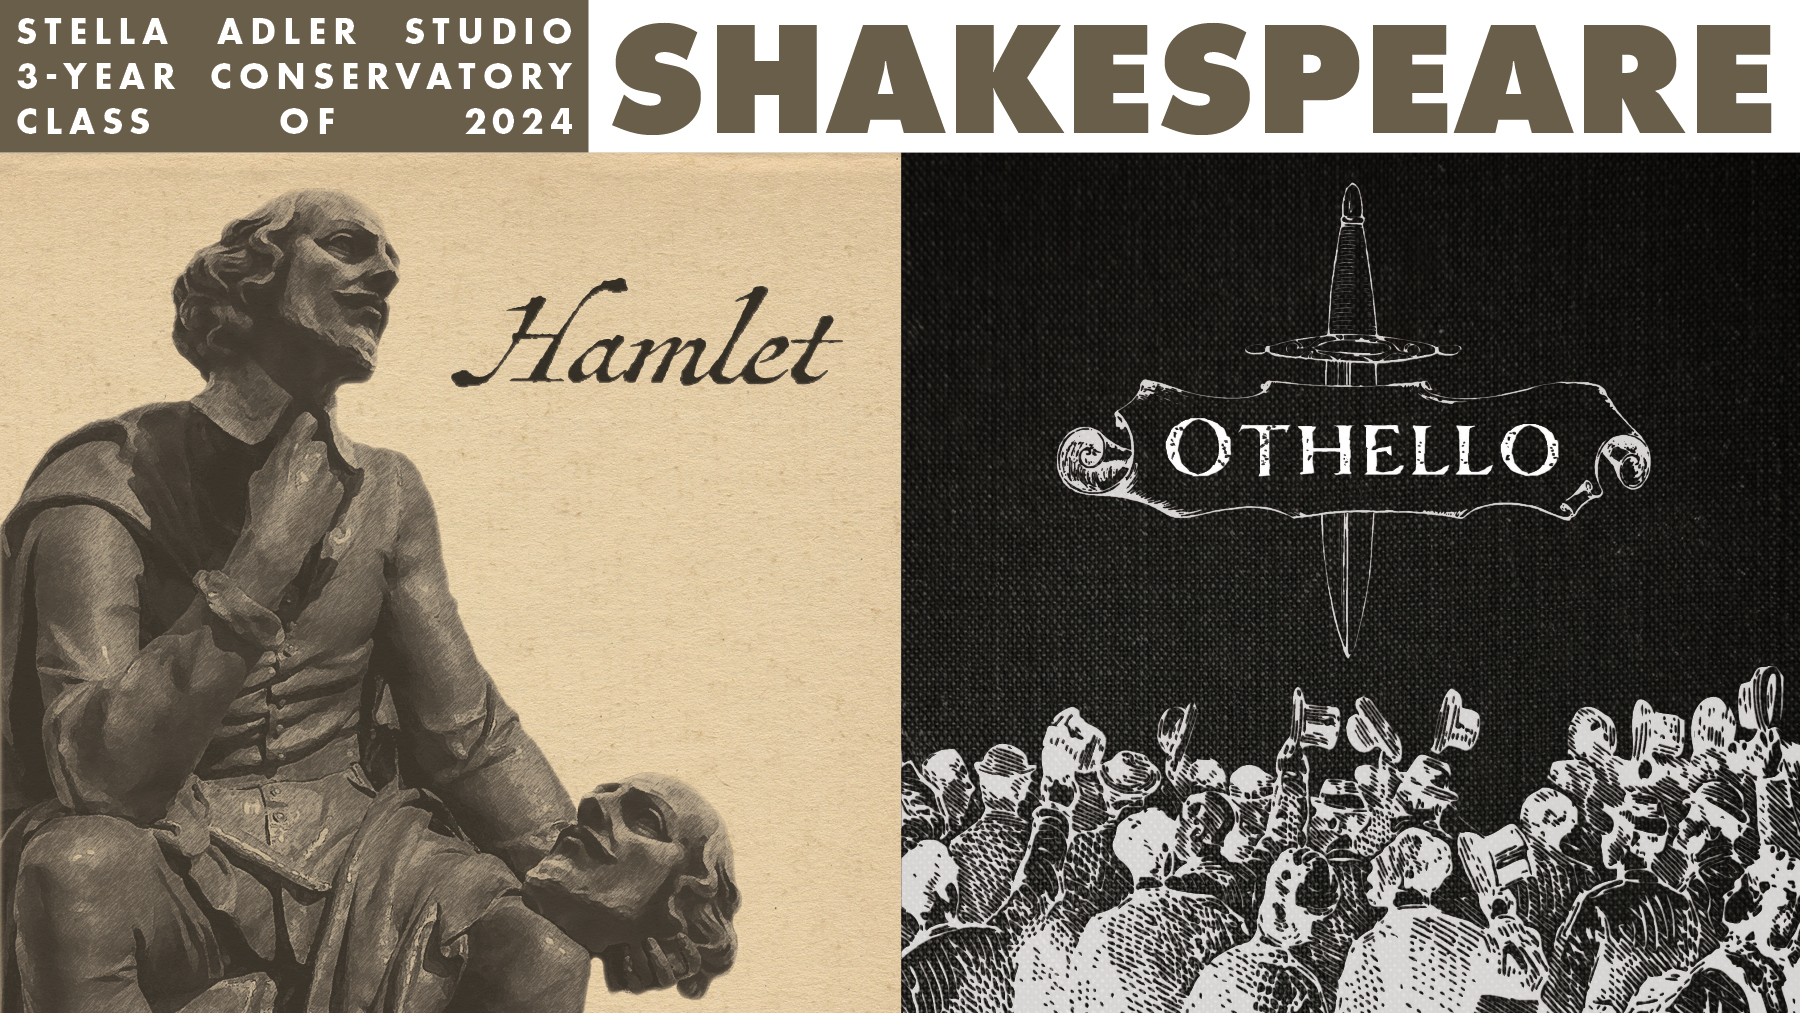 Graphics for the 3-Year Conservatory Class of 2024's Productions of Hamlet and Othello.